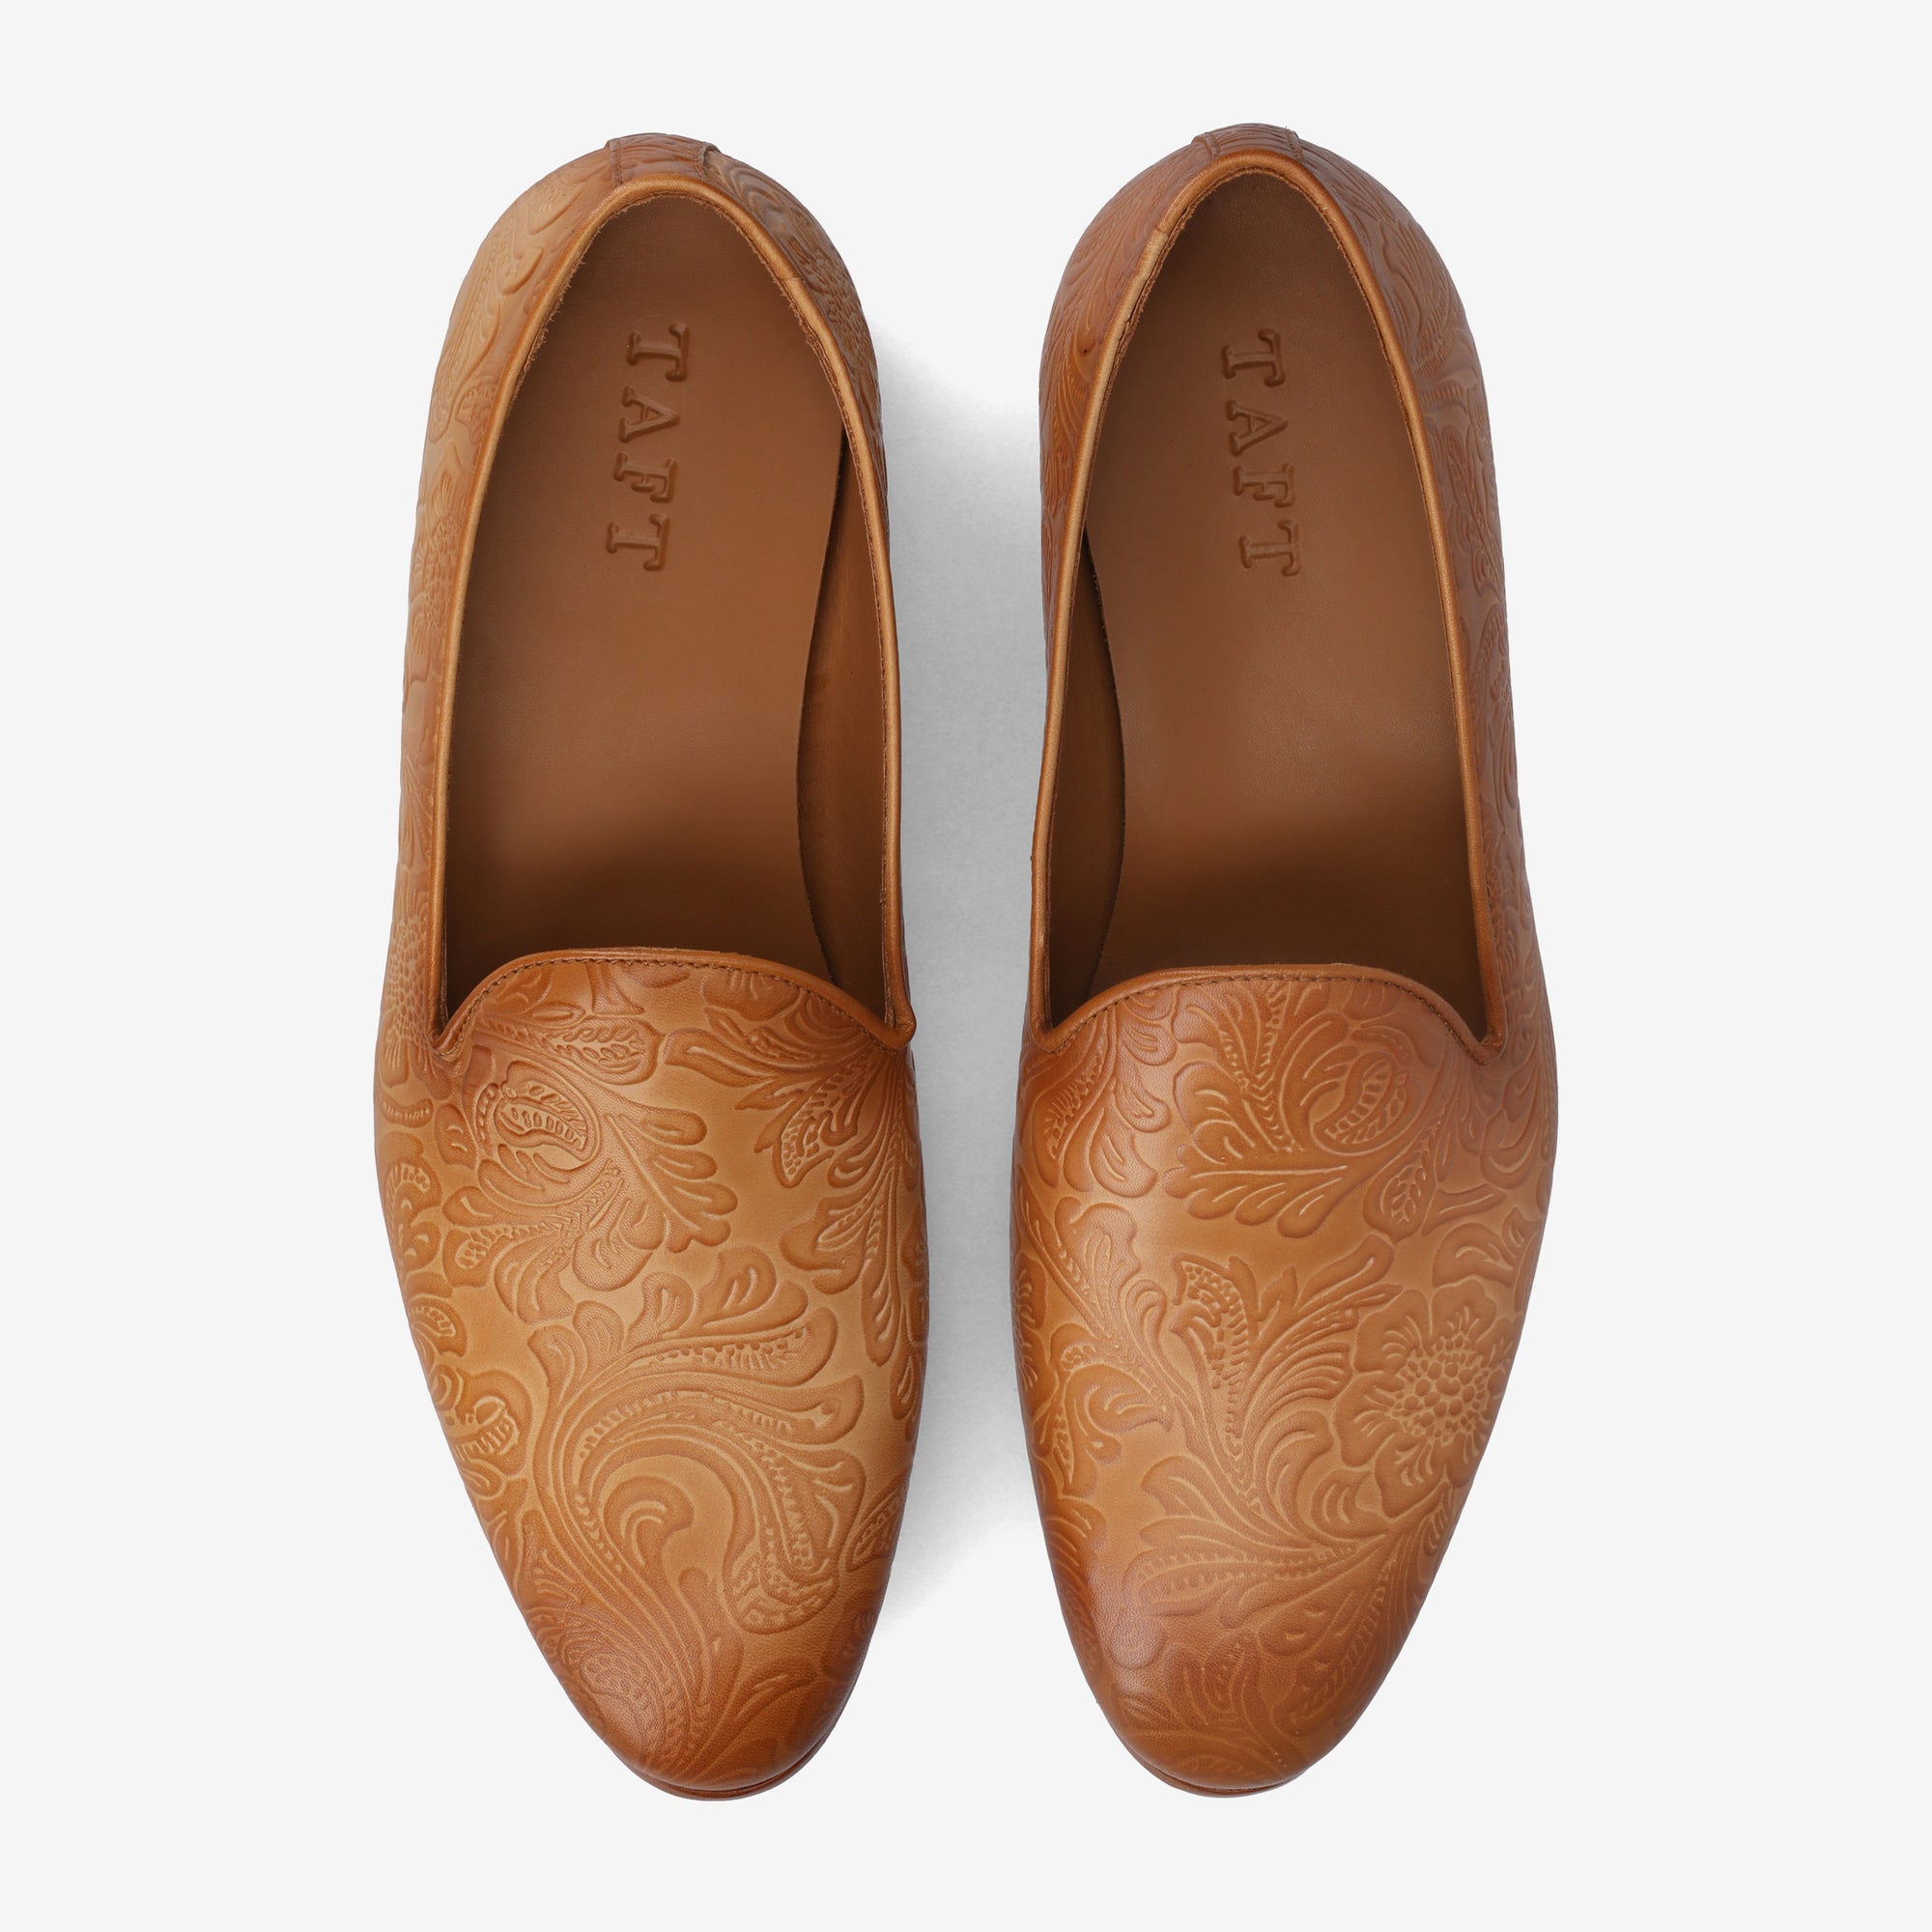 The Monaco Loafer in Honey Floral (Last Chance, Final Sale)